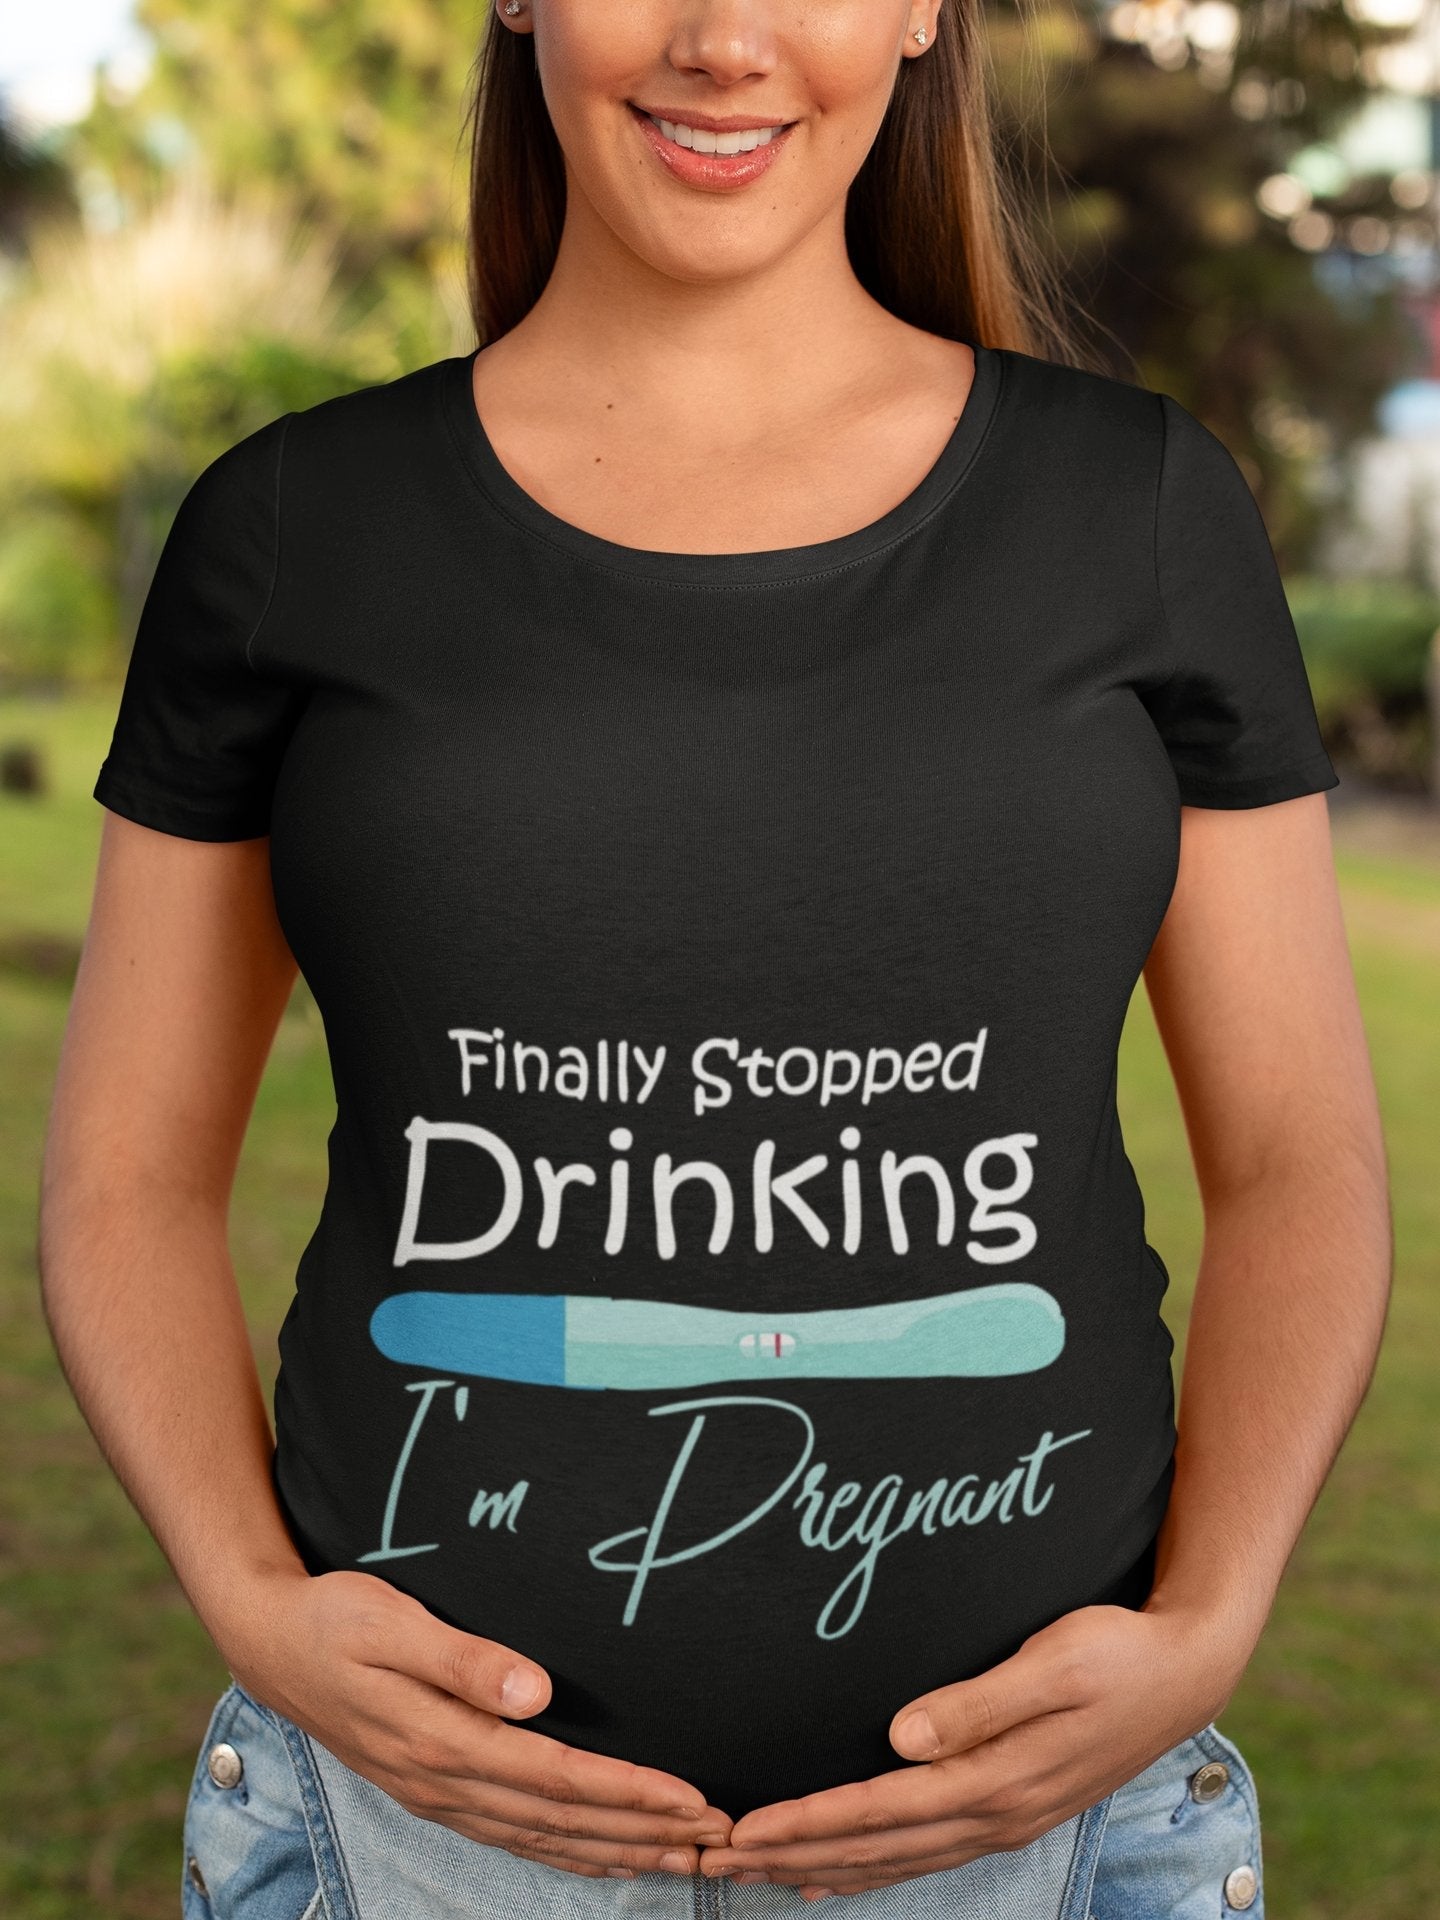 thelegalgang,Finally Stopped Drinking Funny Maternity T shirt,WOMEN.